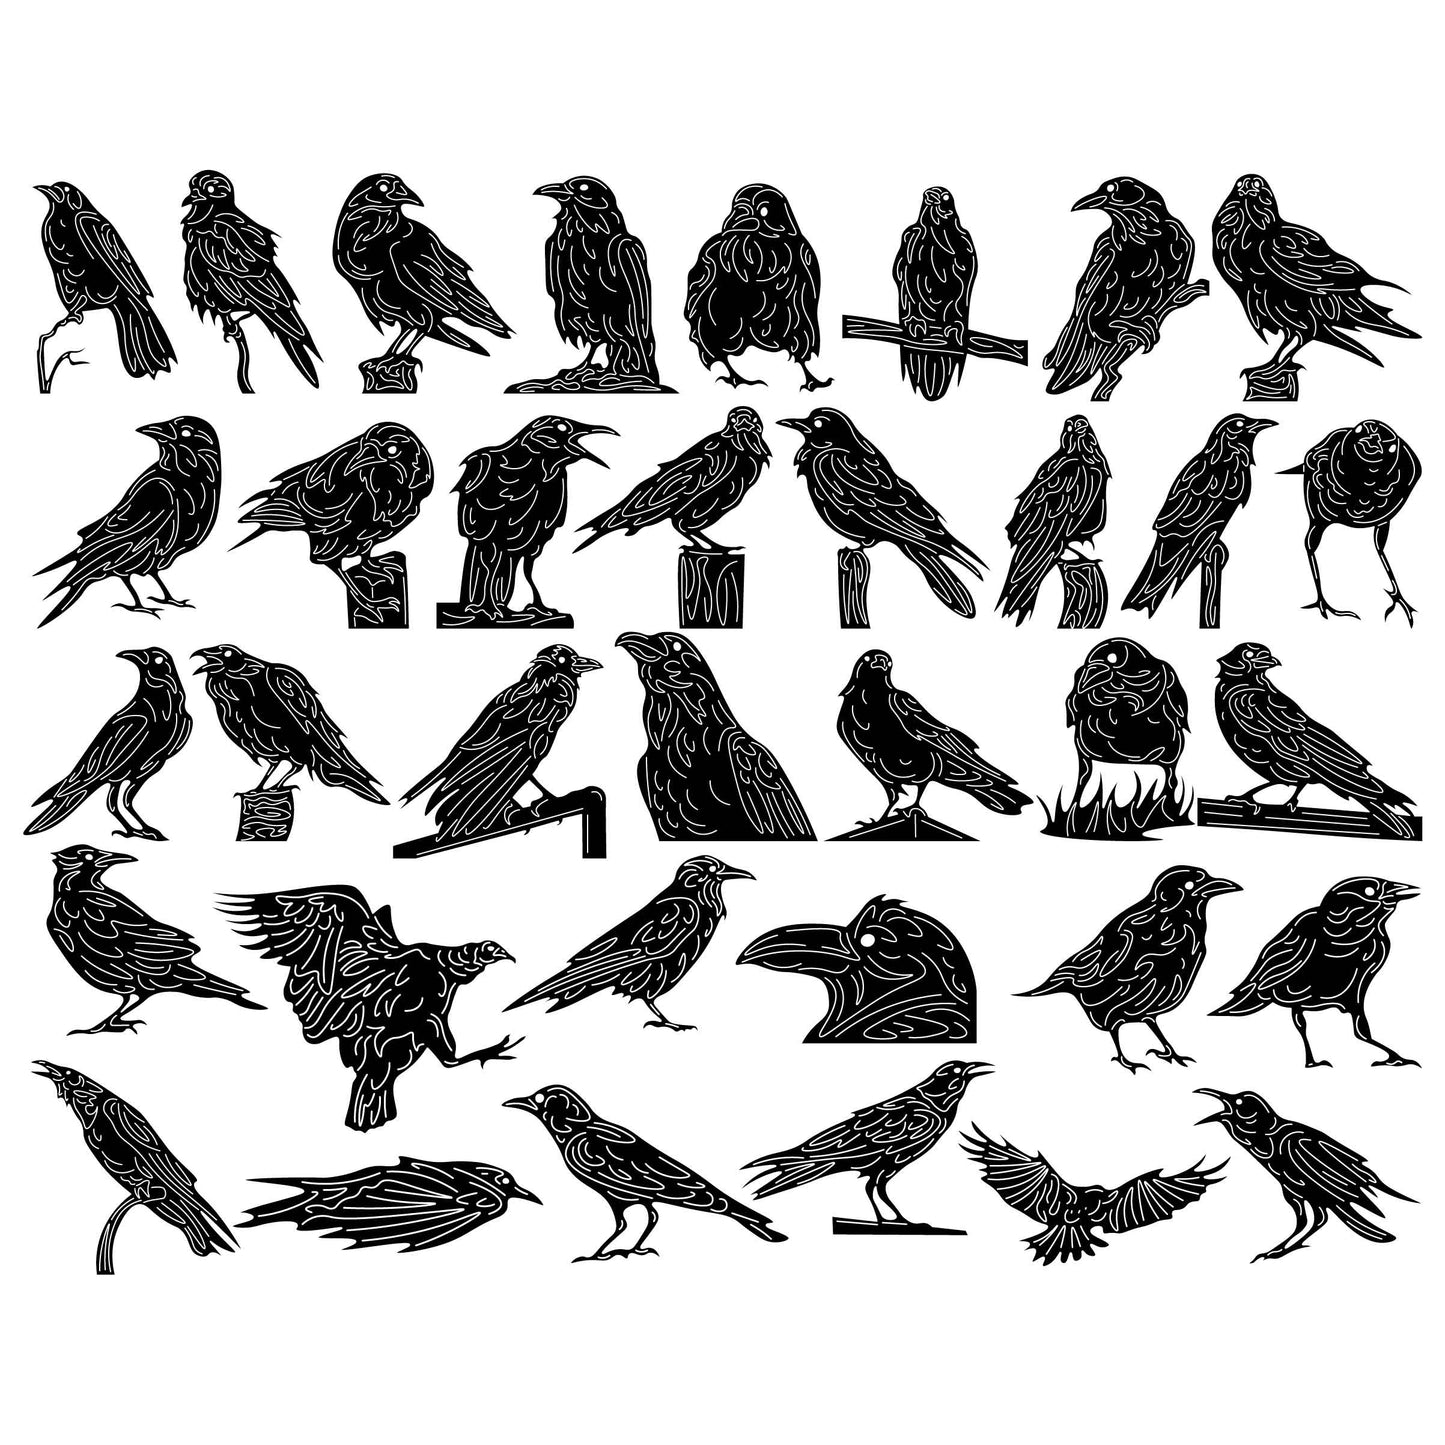 Crows and Raven Birds-DXF files Cut Ready for CNC-DXFforCNC.com